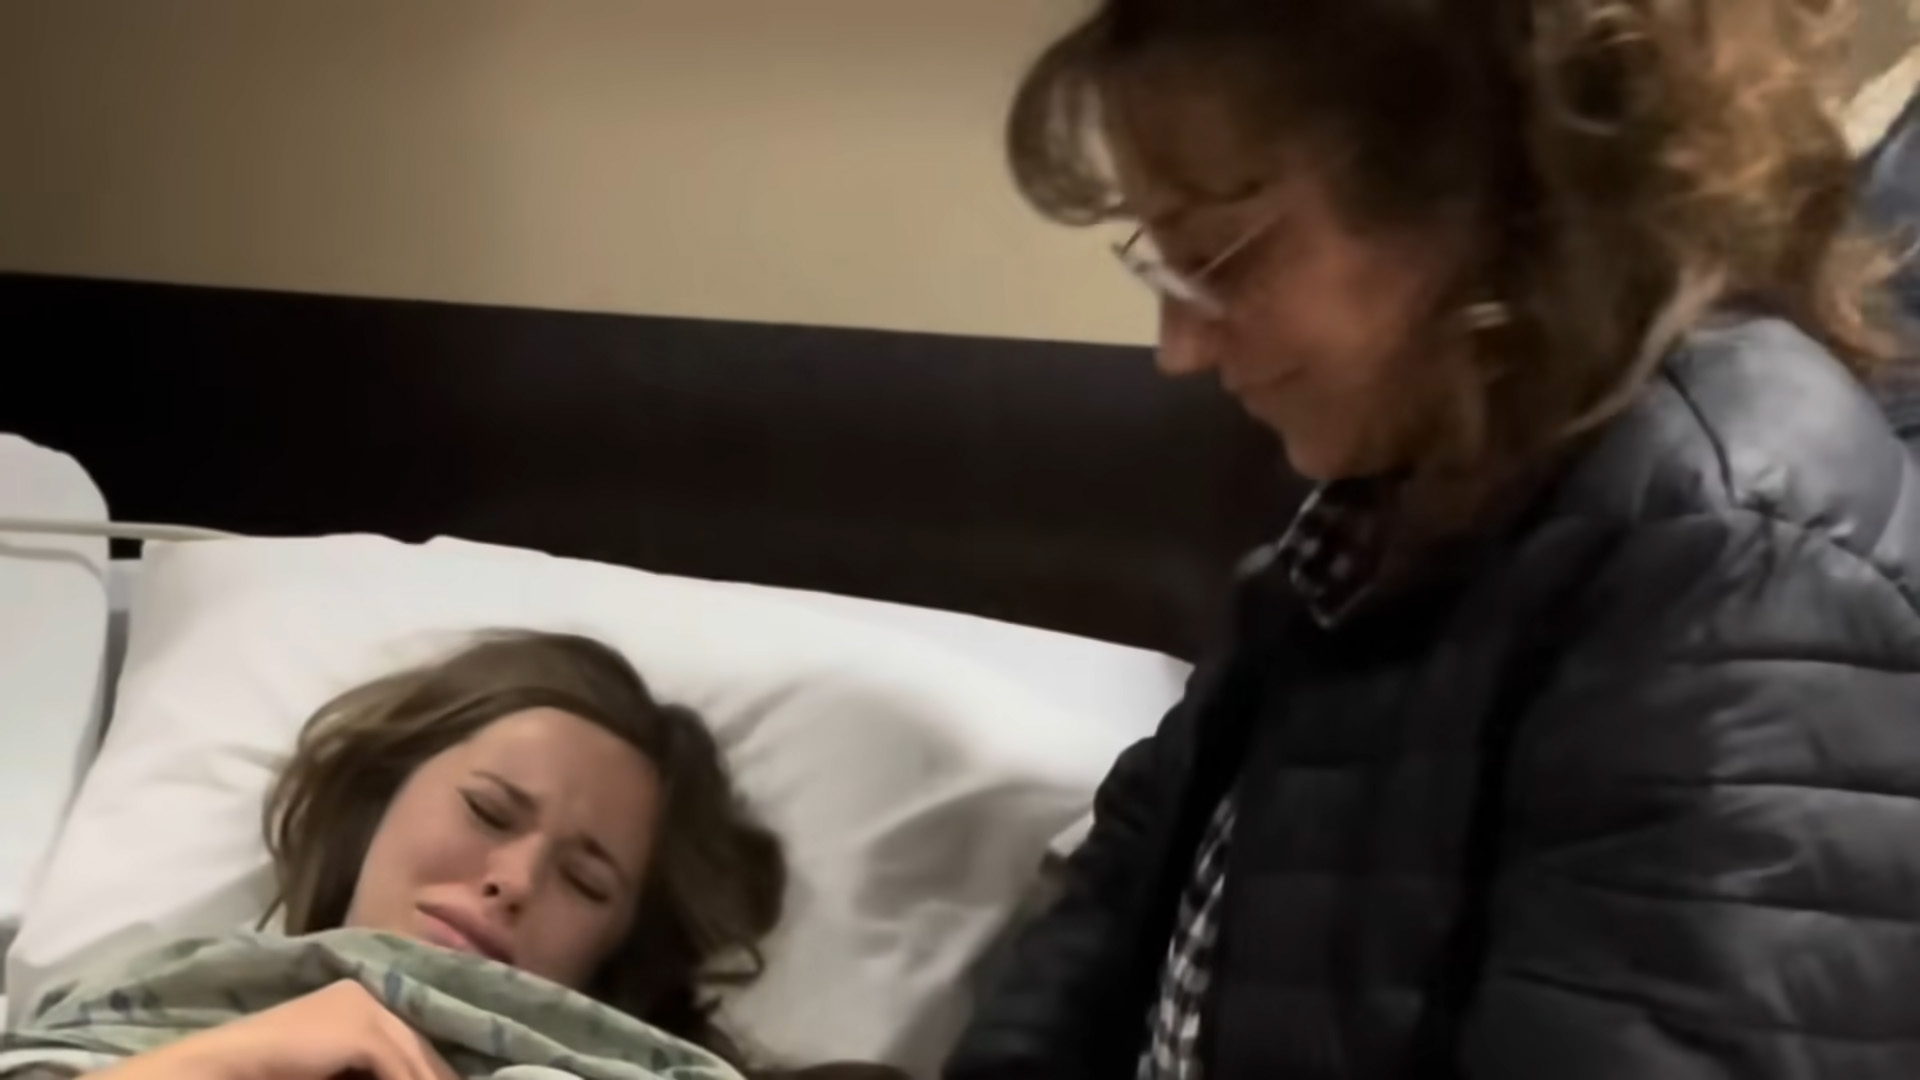 Michelle stood by Jessa's side in the hospital room